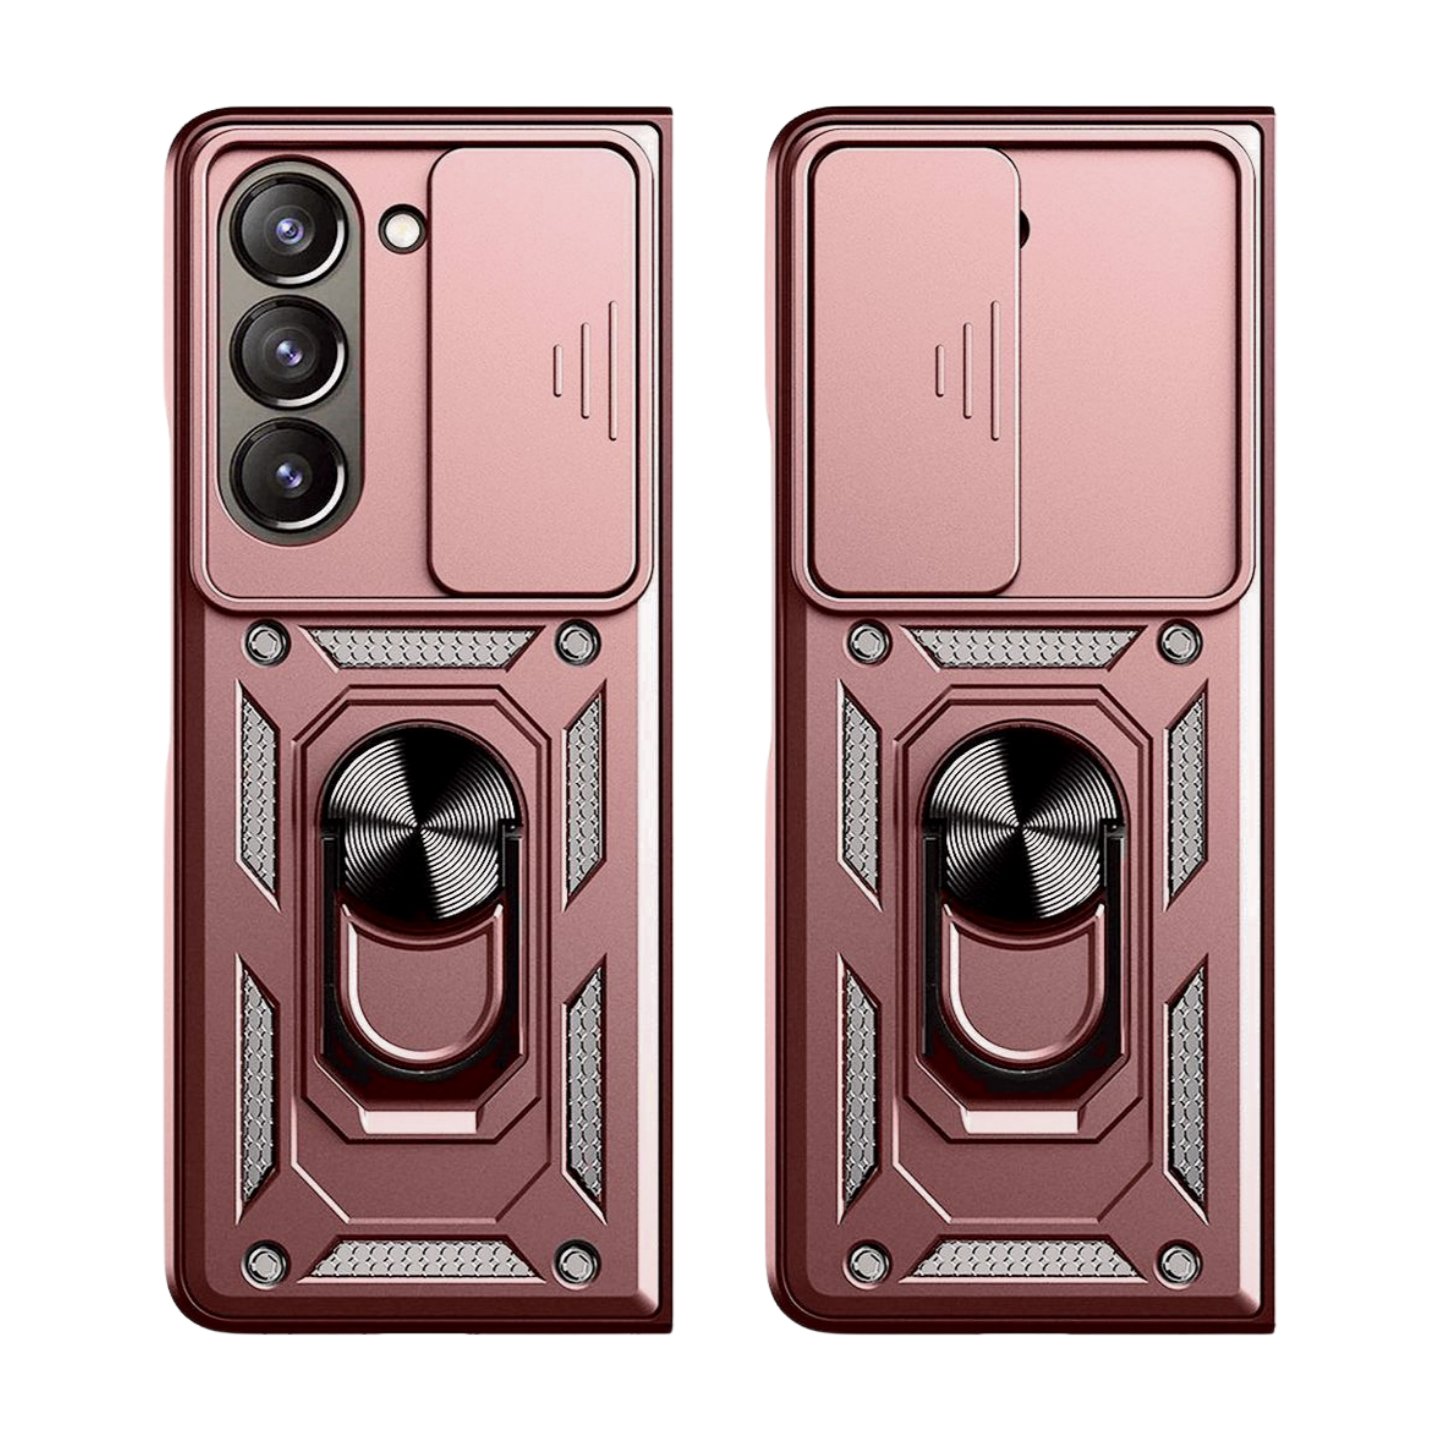 The Fusion Square Galaxy Z Fold 5 Armor Metal Stand Heavy Duty Case with Sliding Camera Protector Cover